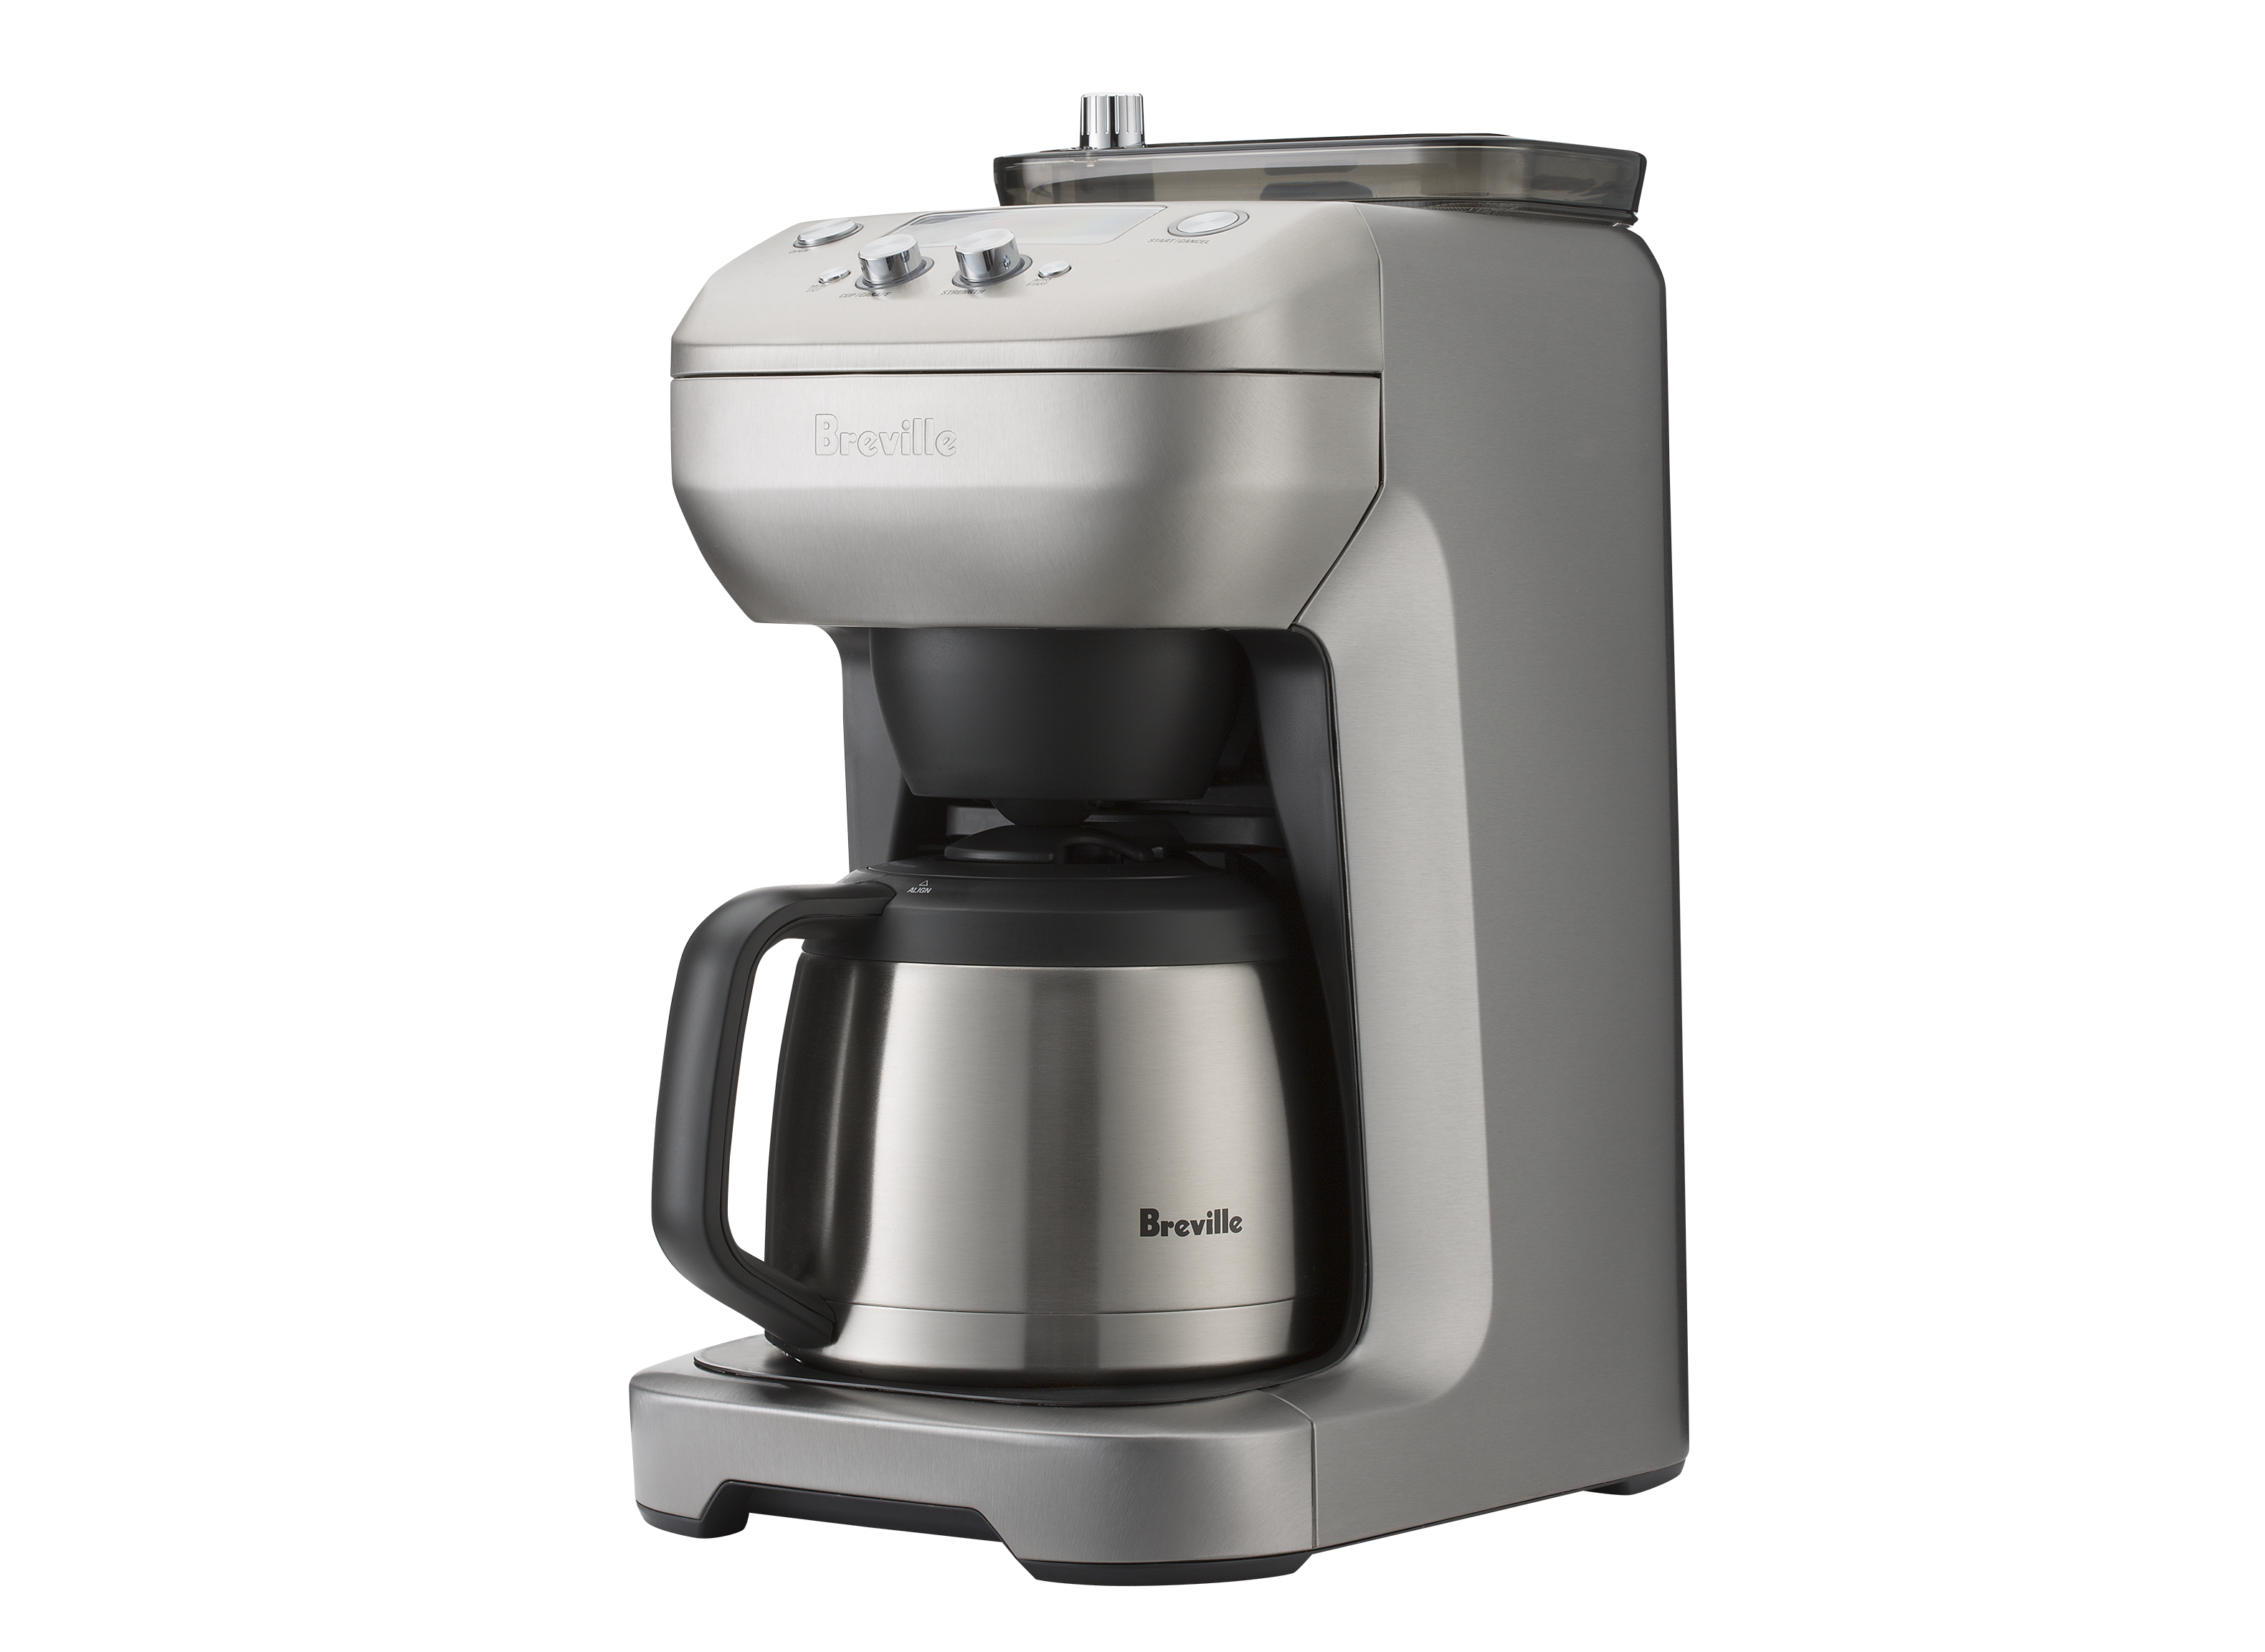 Breville The Grind Control BDC650BSS Coffee Maker Review - Consumer Reports